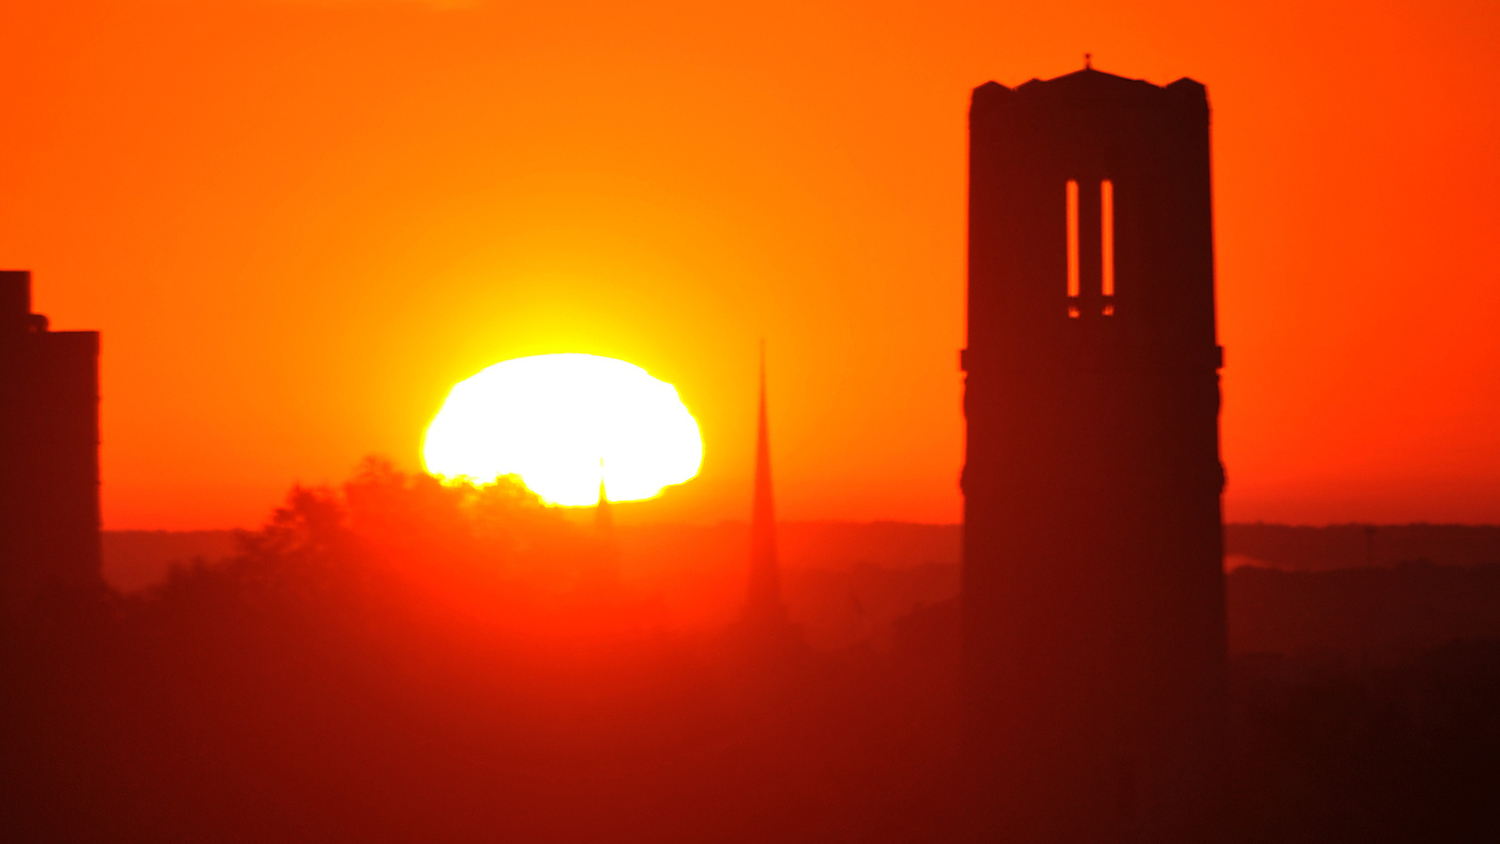 A view of the NC State belltower during sunset - Industry Partnership to Assess Climate Change Risks - College of Natural Resources News NC State University